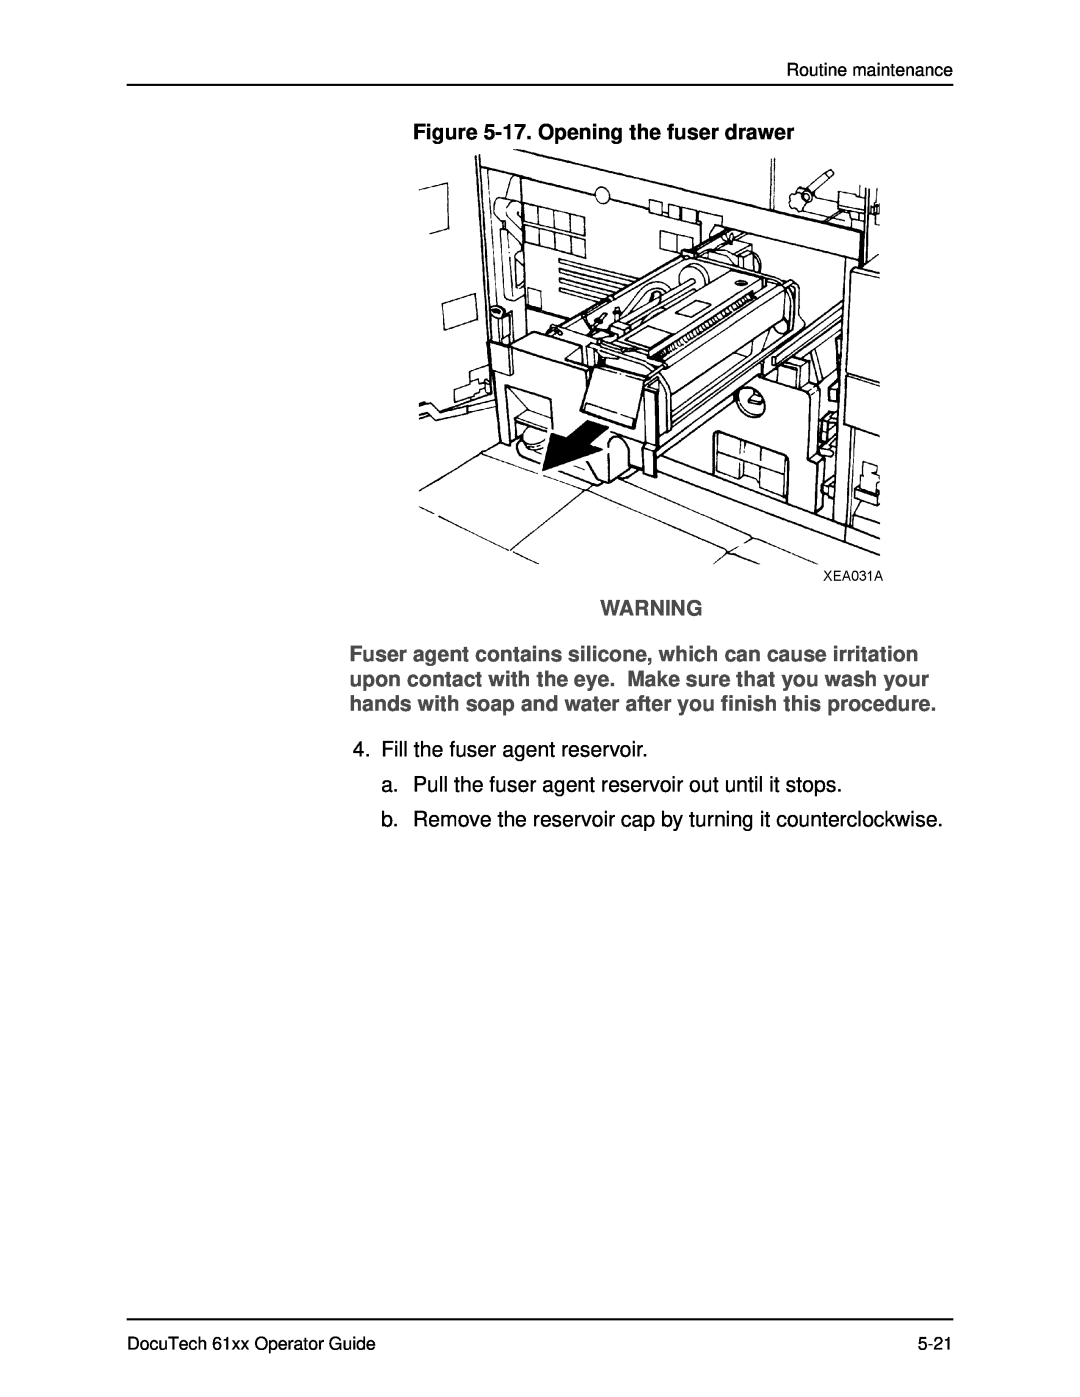 Xerox 61xx manual 17. Opening the fuser drawer, Fill the fuser agent reservoir 